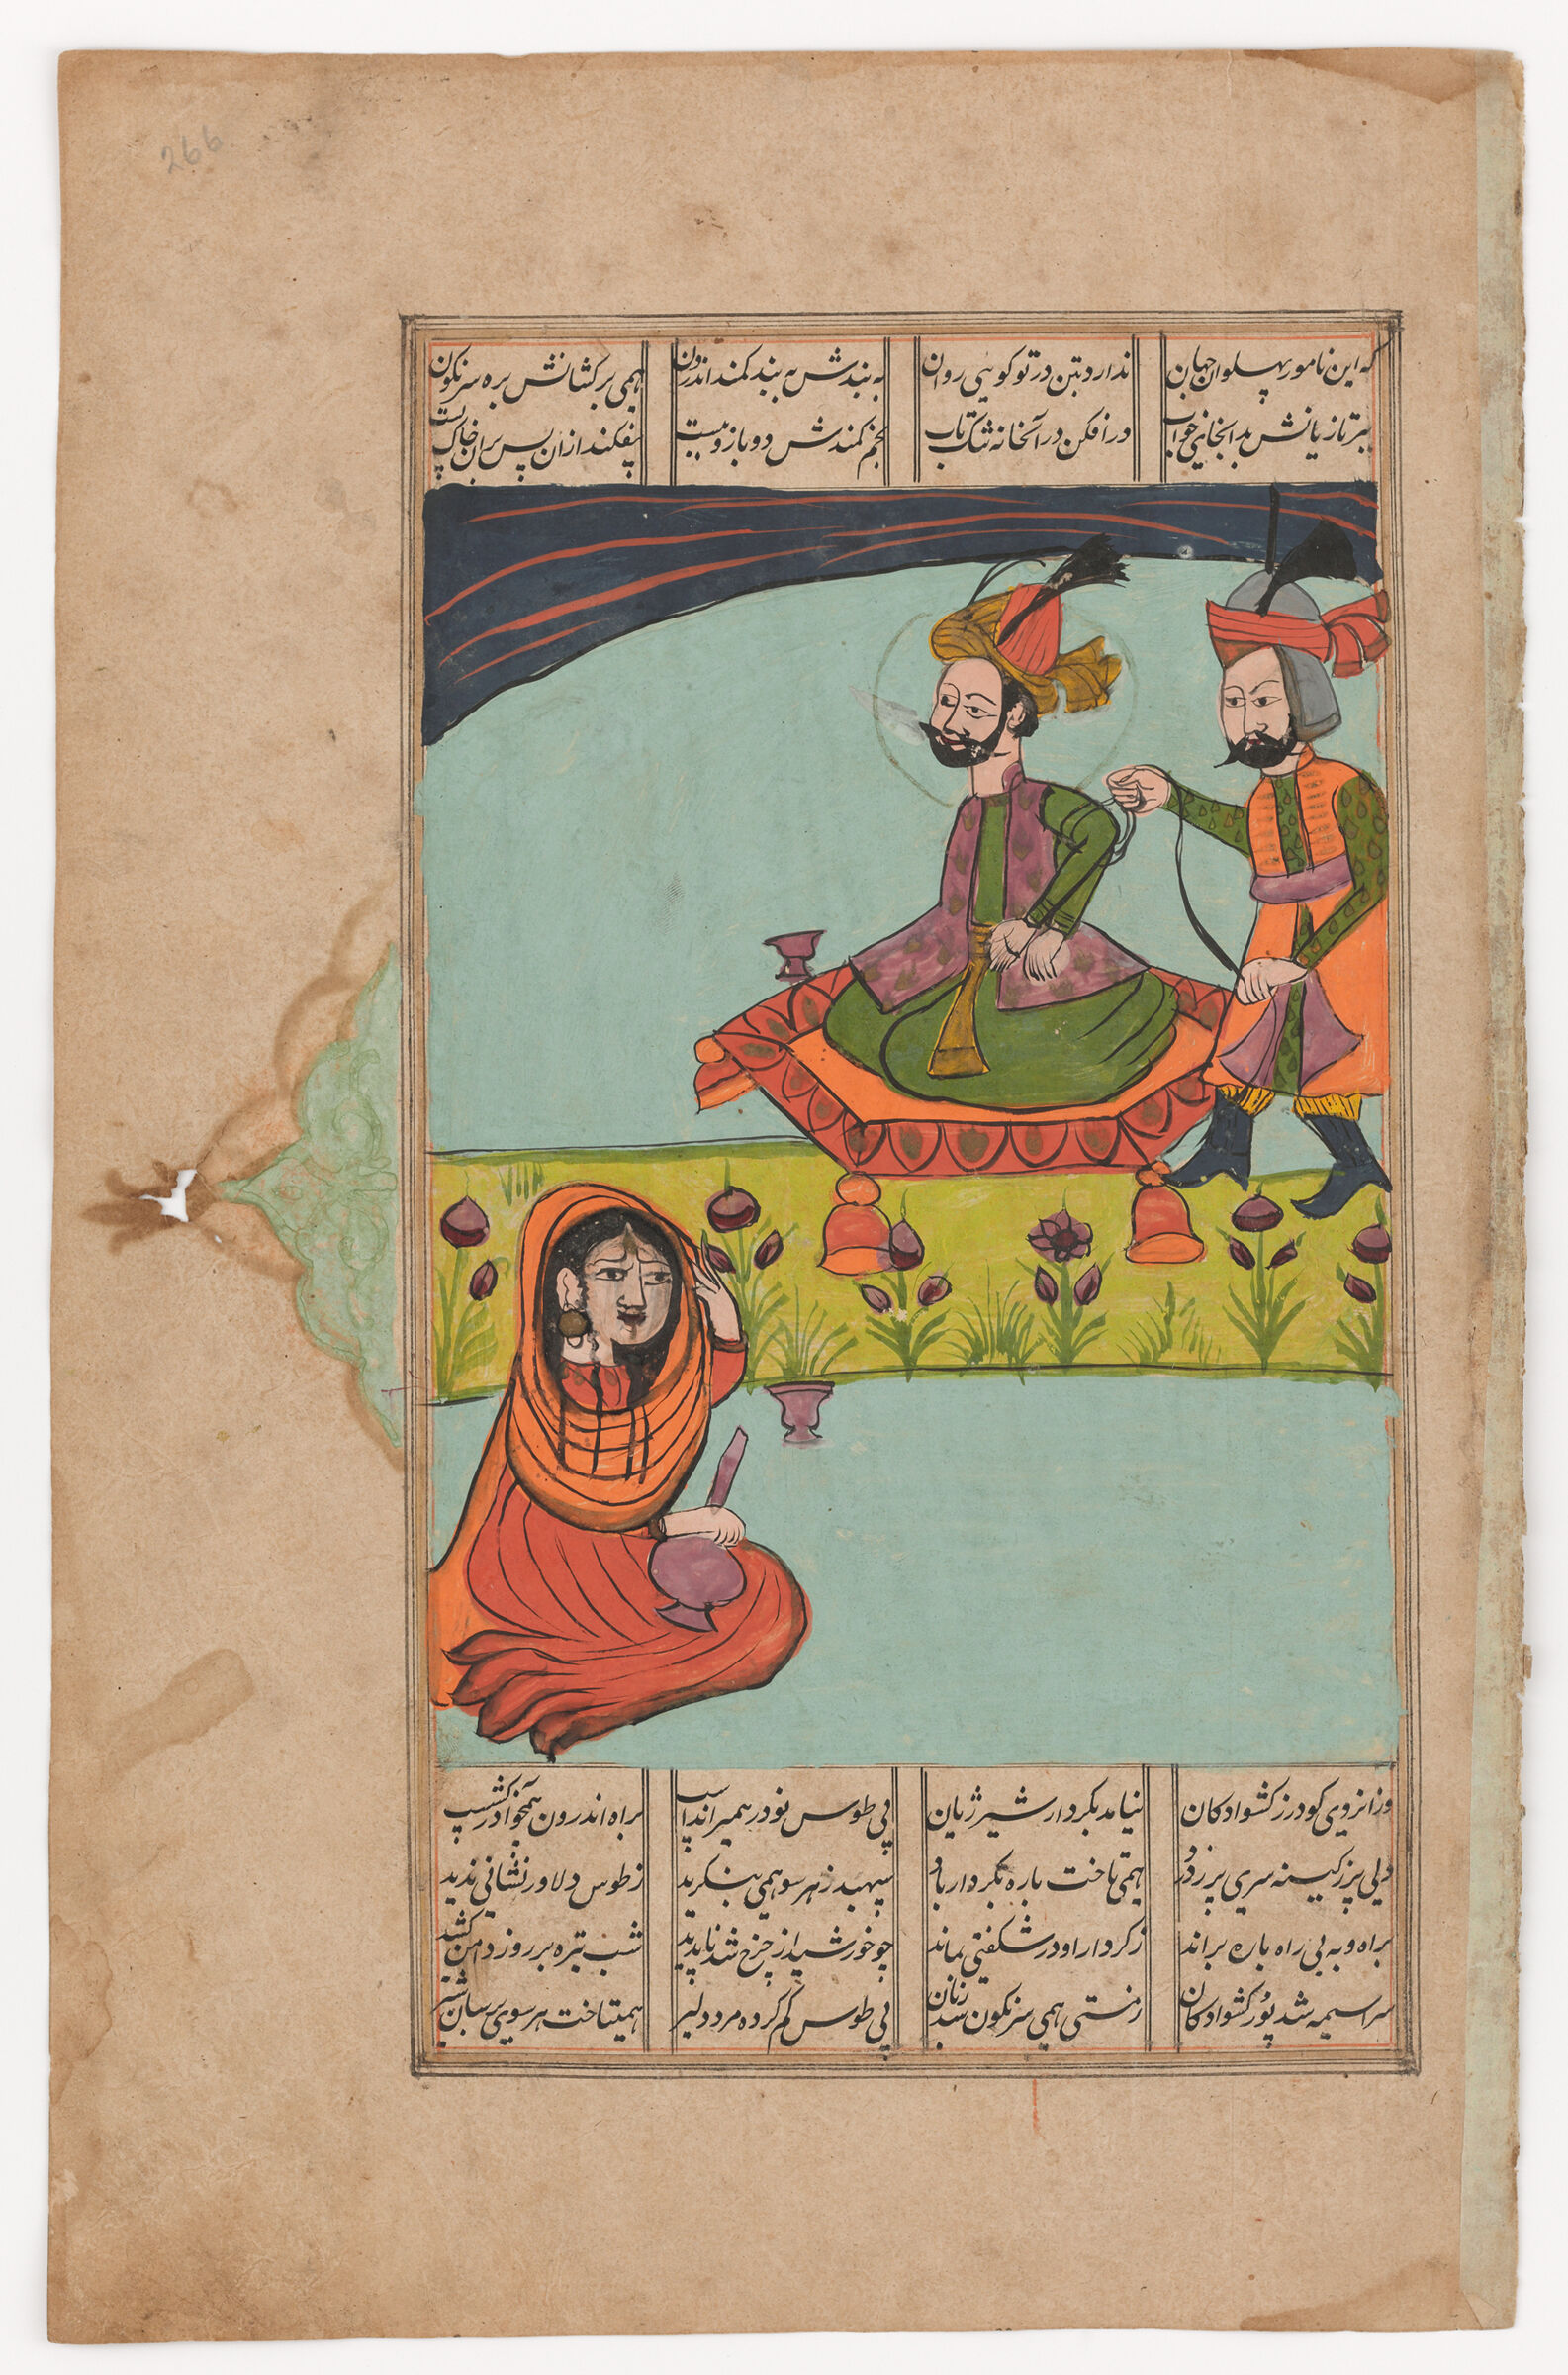 Tus Falls Under The Spell Of Susan (Painting Recto; Text Verso Of Folio 266), Illustrated Folio From A Manuscript Of The Shahnama By Firdawsi